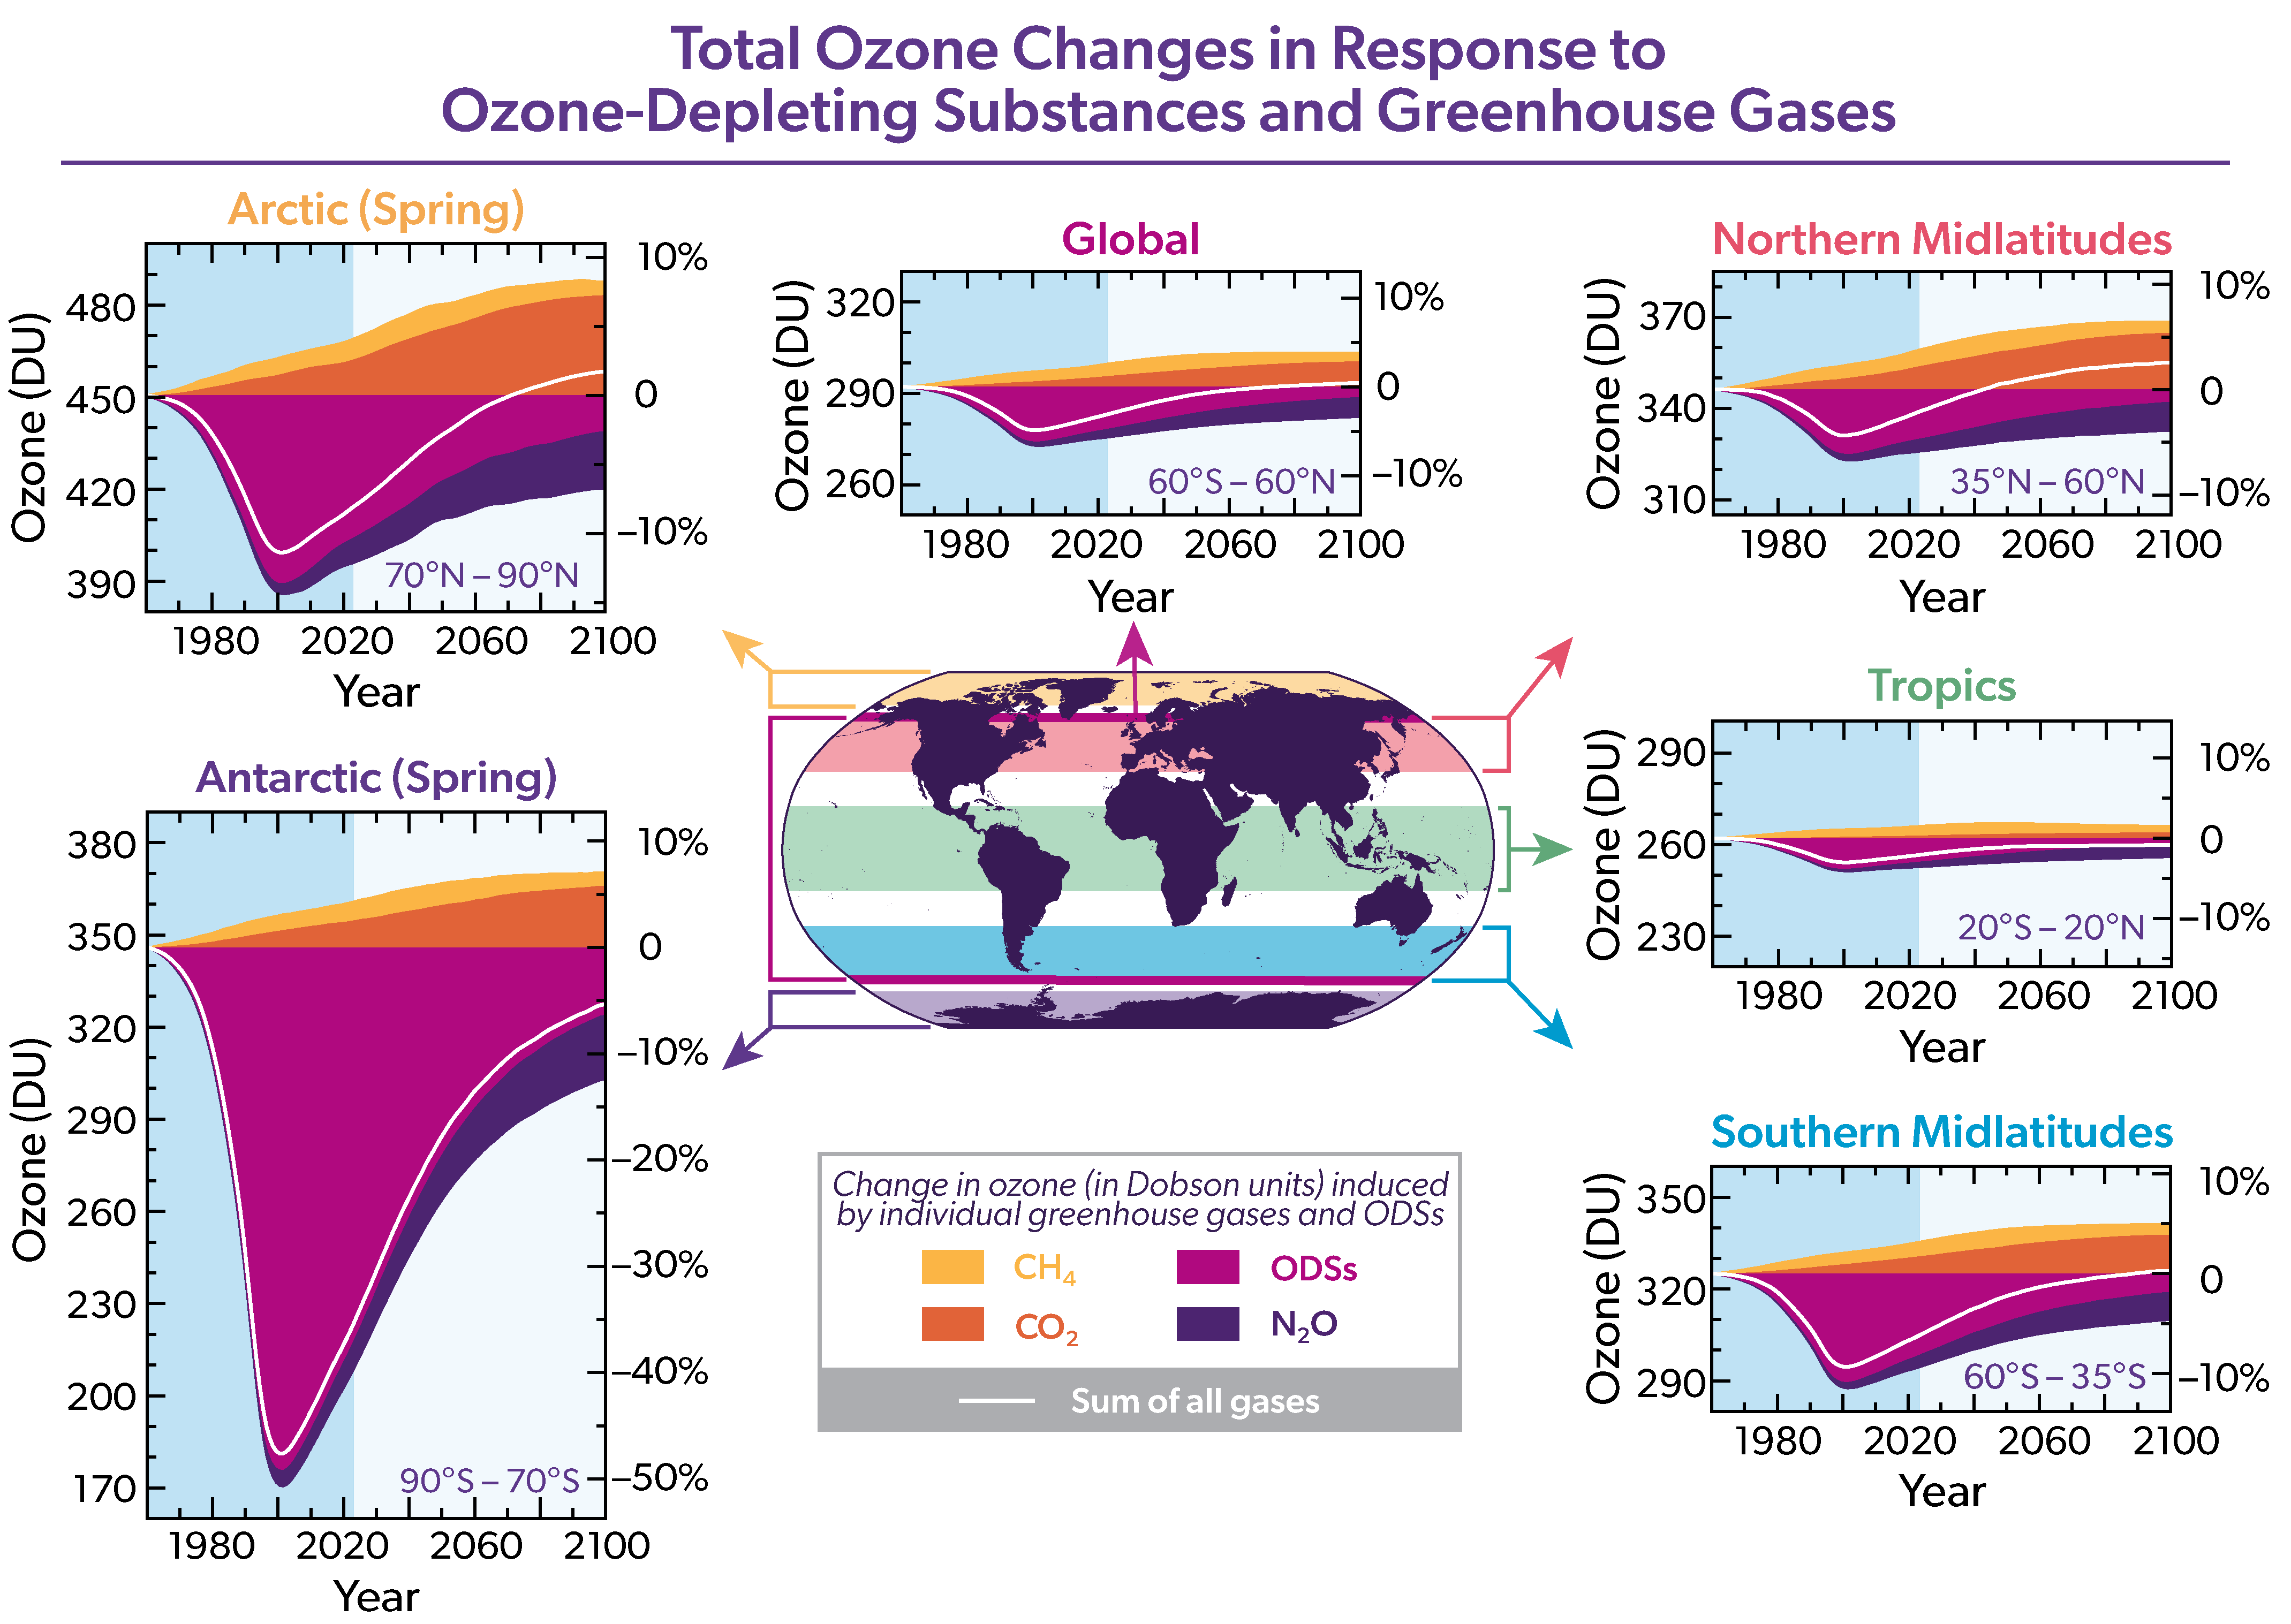 Total Ozone Change in Response to Ozone-Depleting Sunstances and Greenhouse Gases